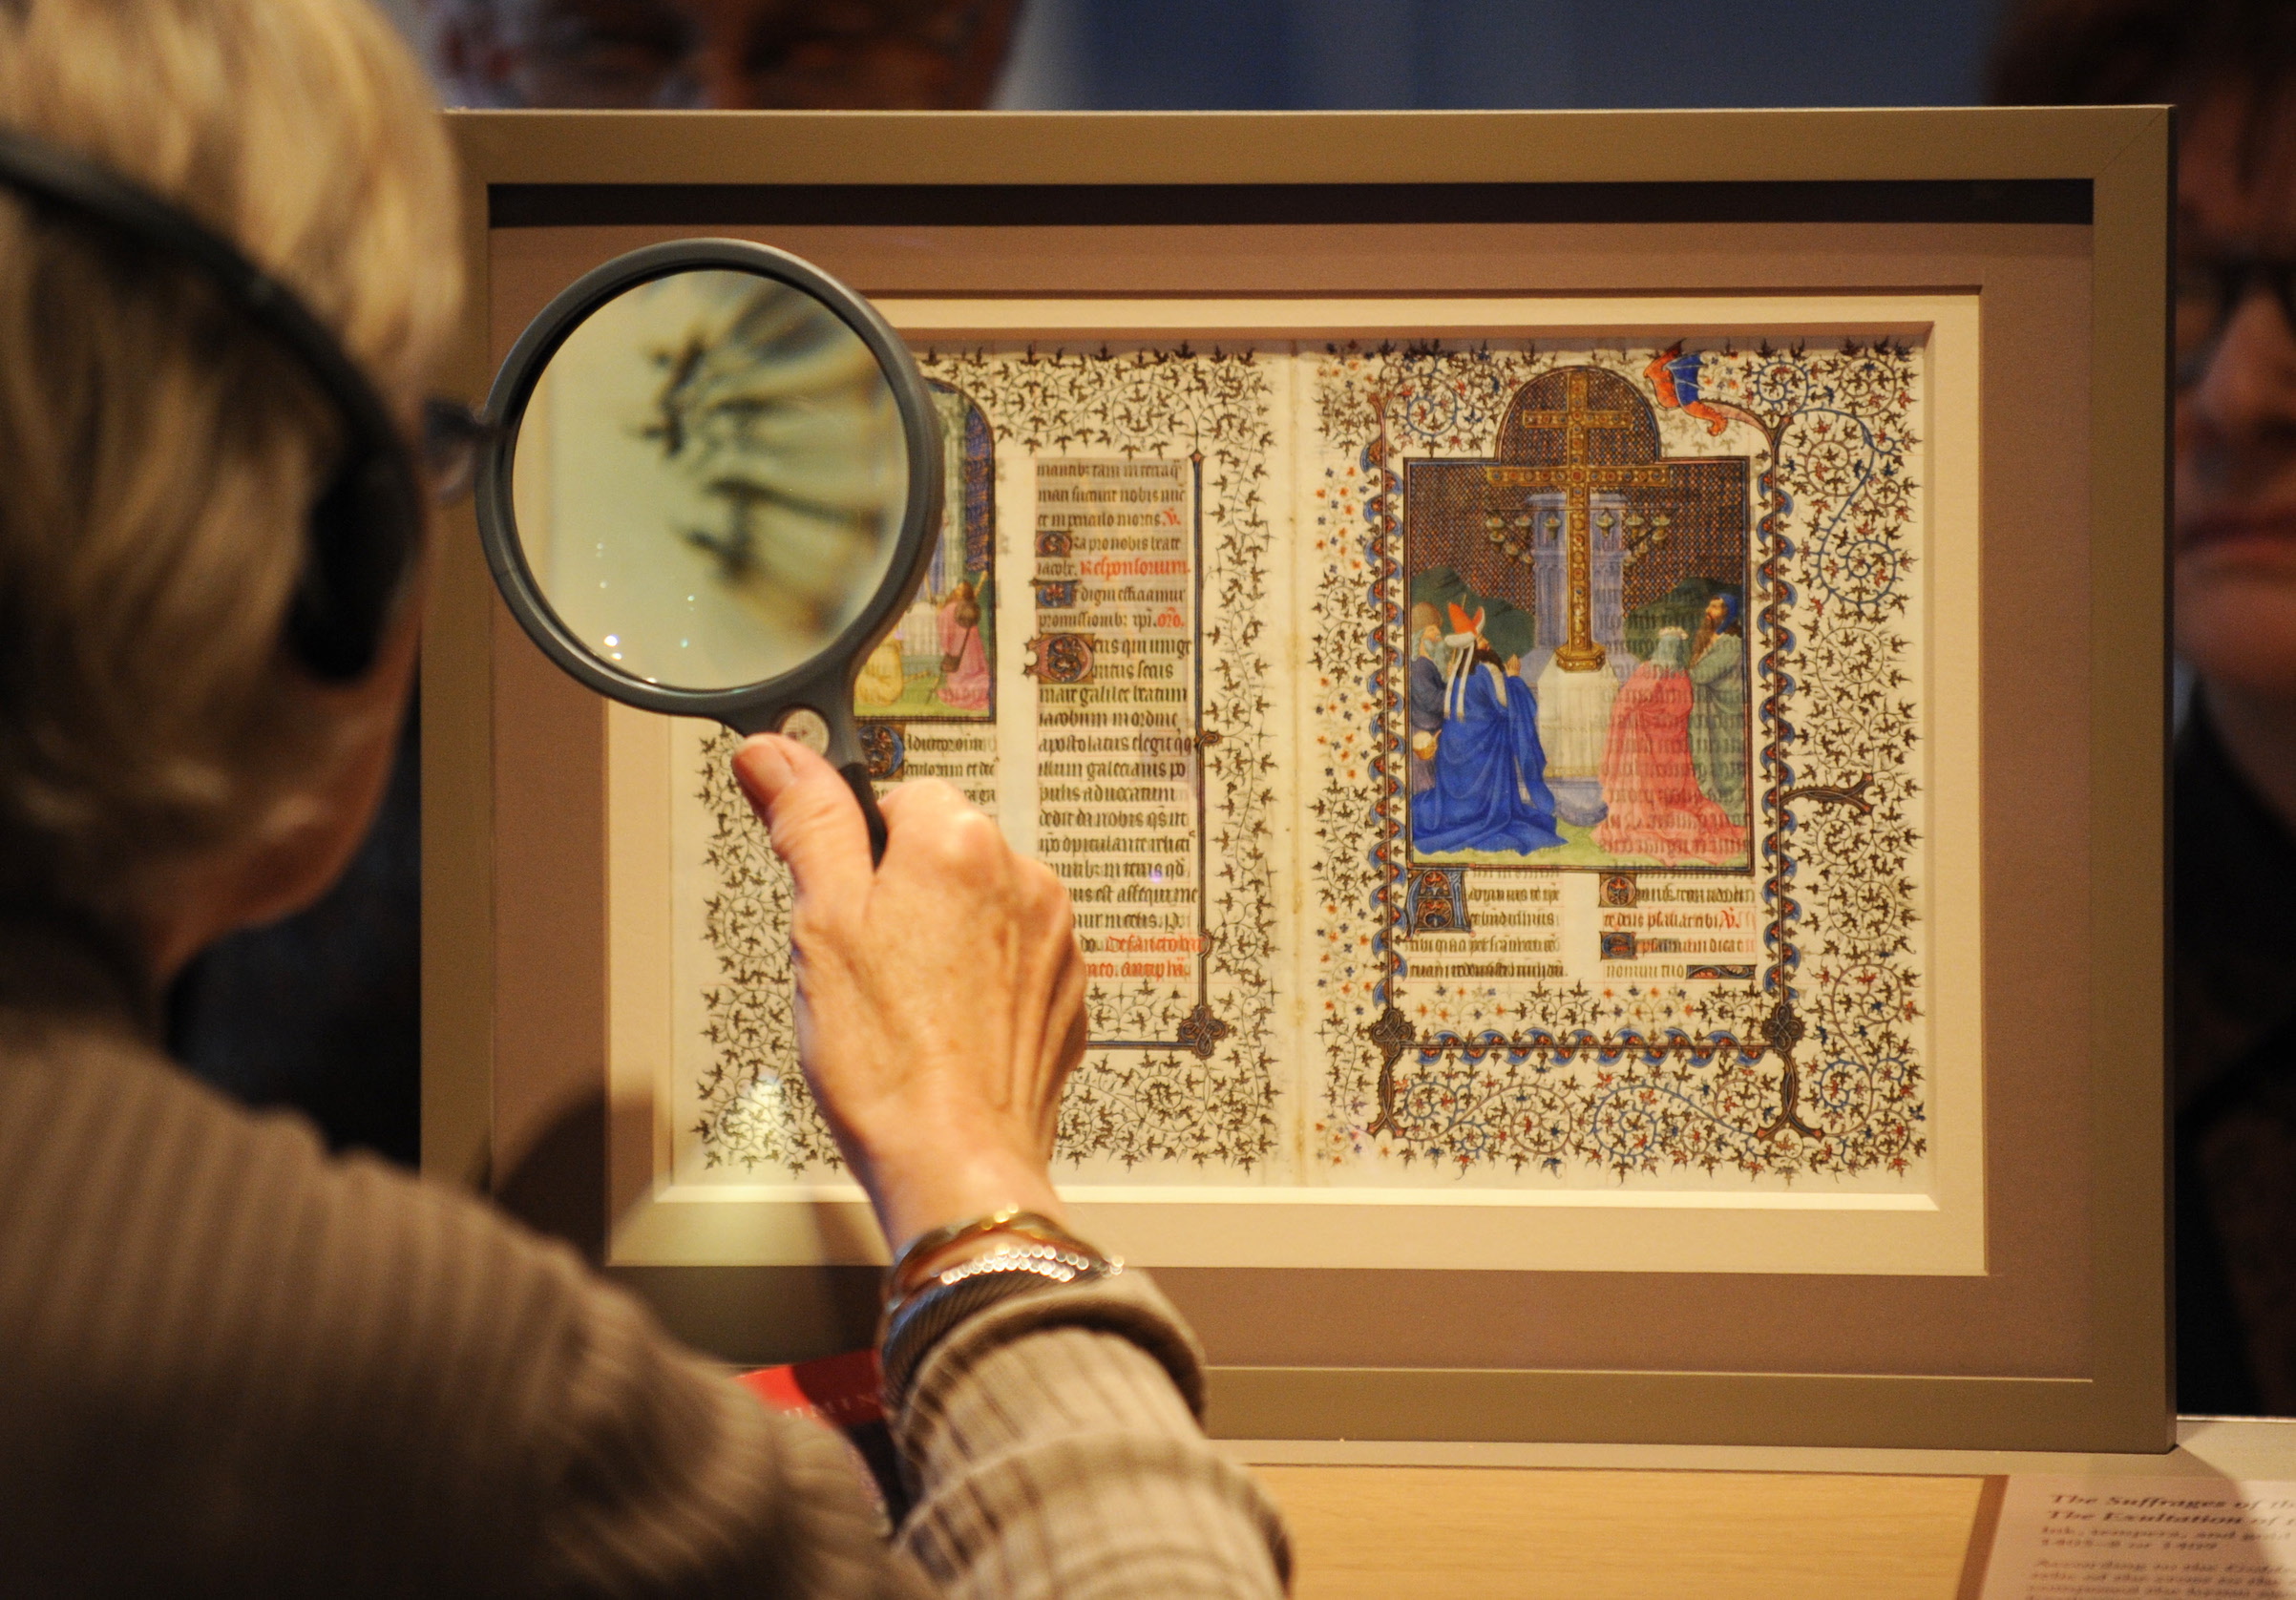 A woman uses a magnifying glass to view pages from a medieval prayer book known as the Belles Heures, on in 2010 at the Metropolitan Museum of Art in New York City. (Stan Honda—AFP via Getty Images)